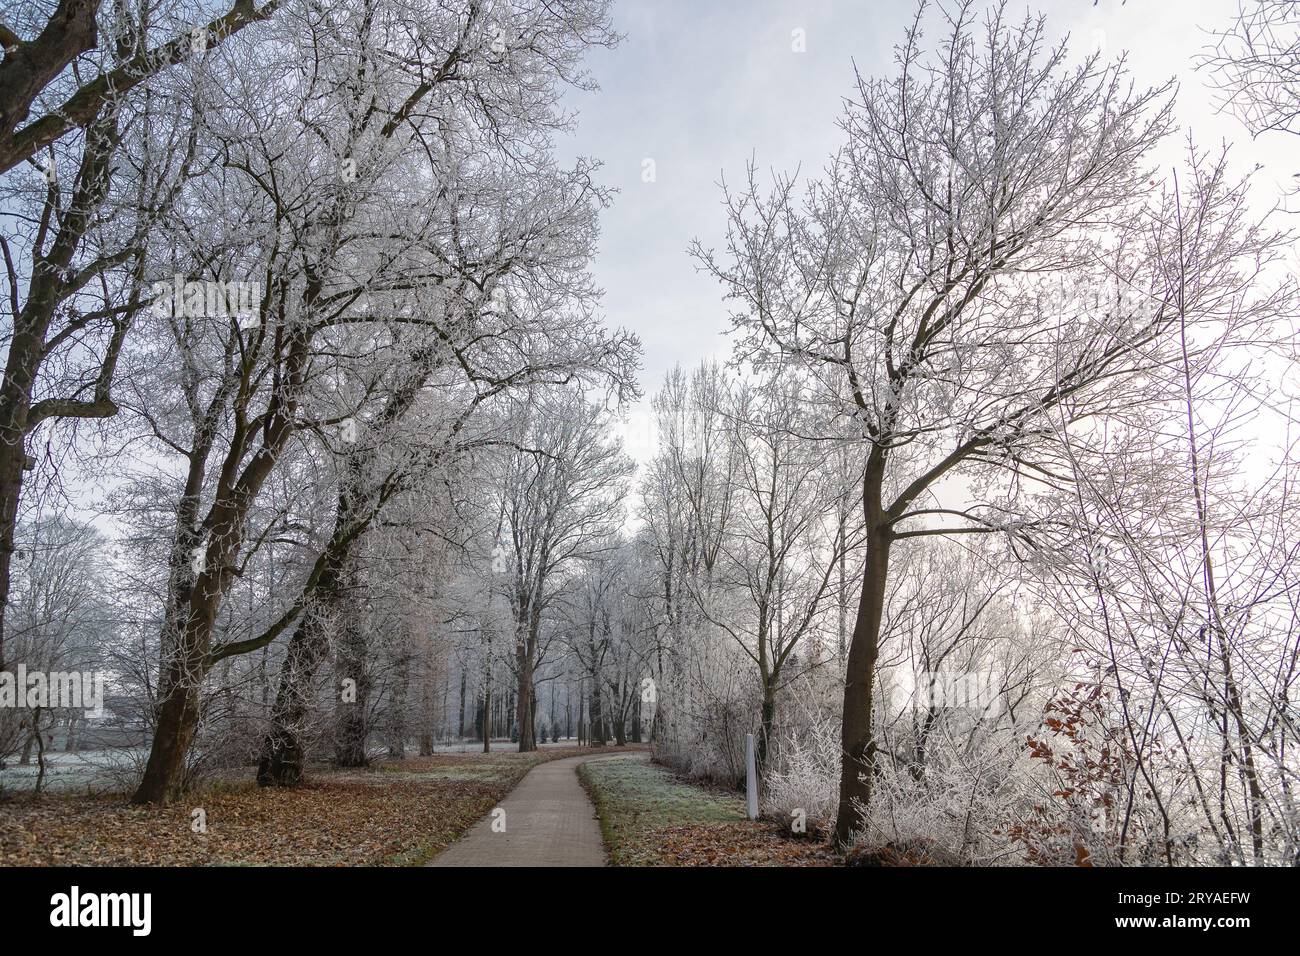 Hoar frost on trees and grass in a park with a footpath Stock Photo